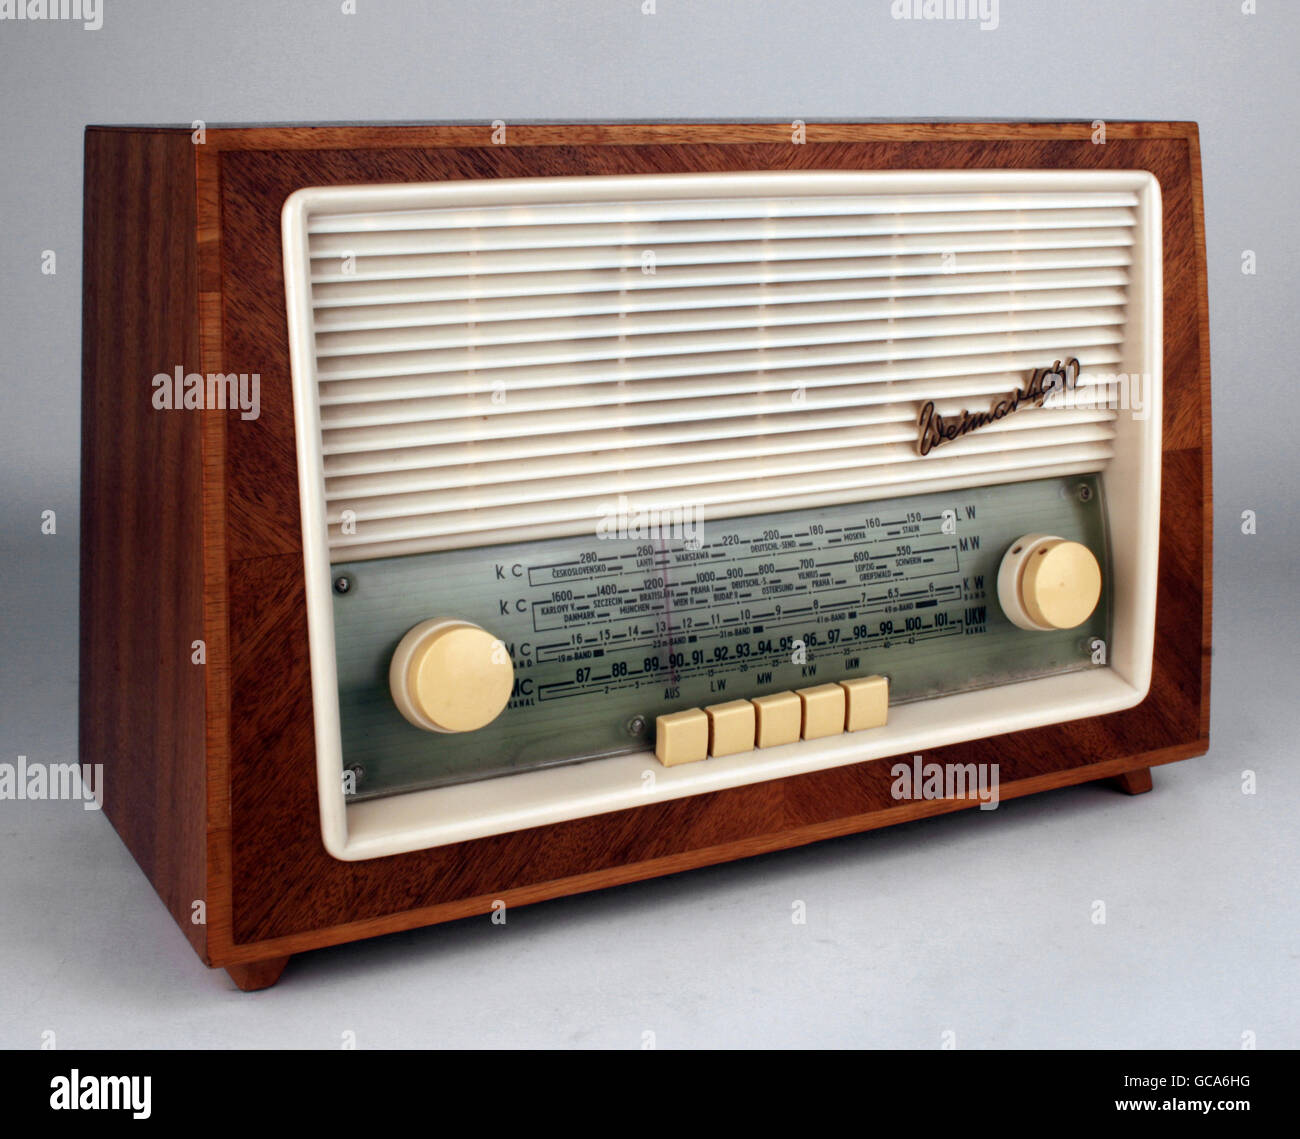 broadcast, radio, radio sets, Kleinsuper "Weimar 4960", made by VEB Stern-Radio  Sonneberg, GDR, 1960, Additional-Rights-Clearences-Not Available Stock  Photo - Alamy